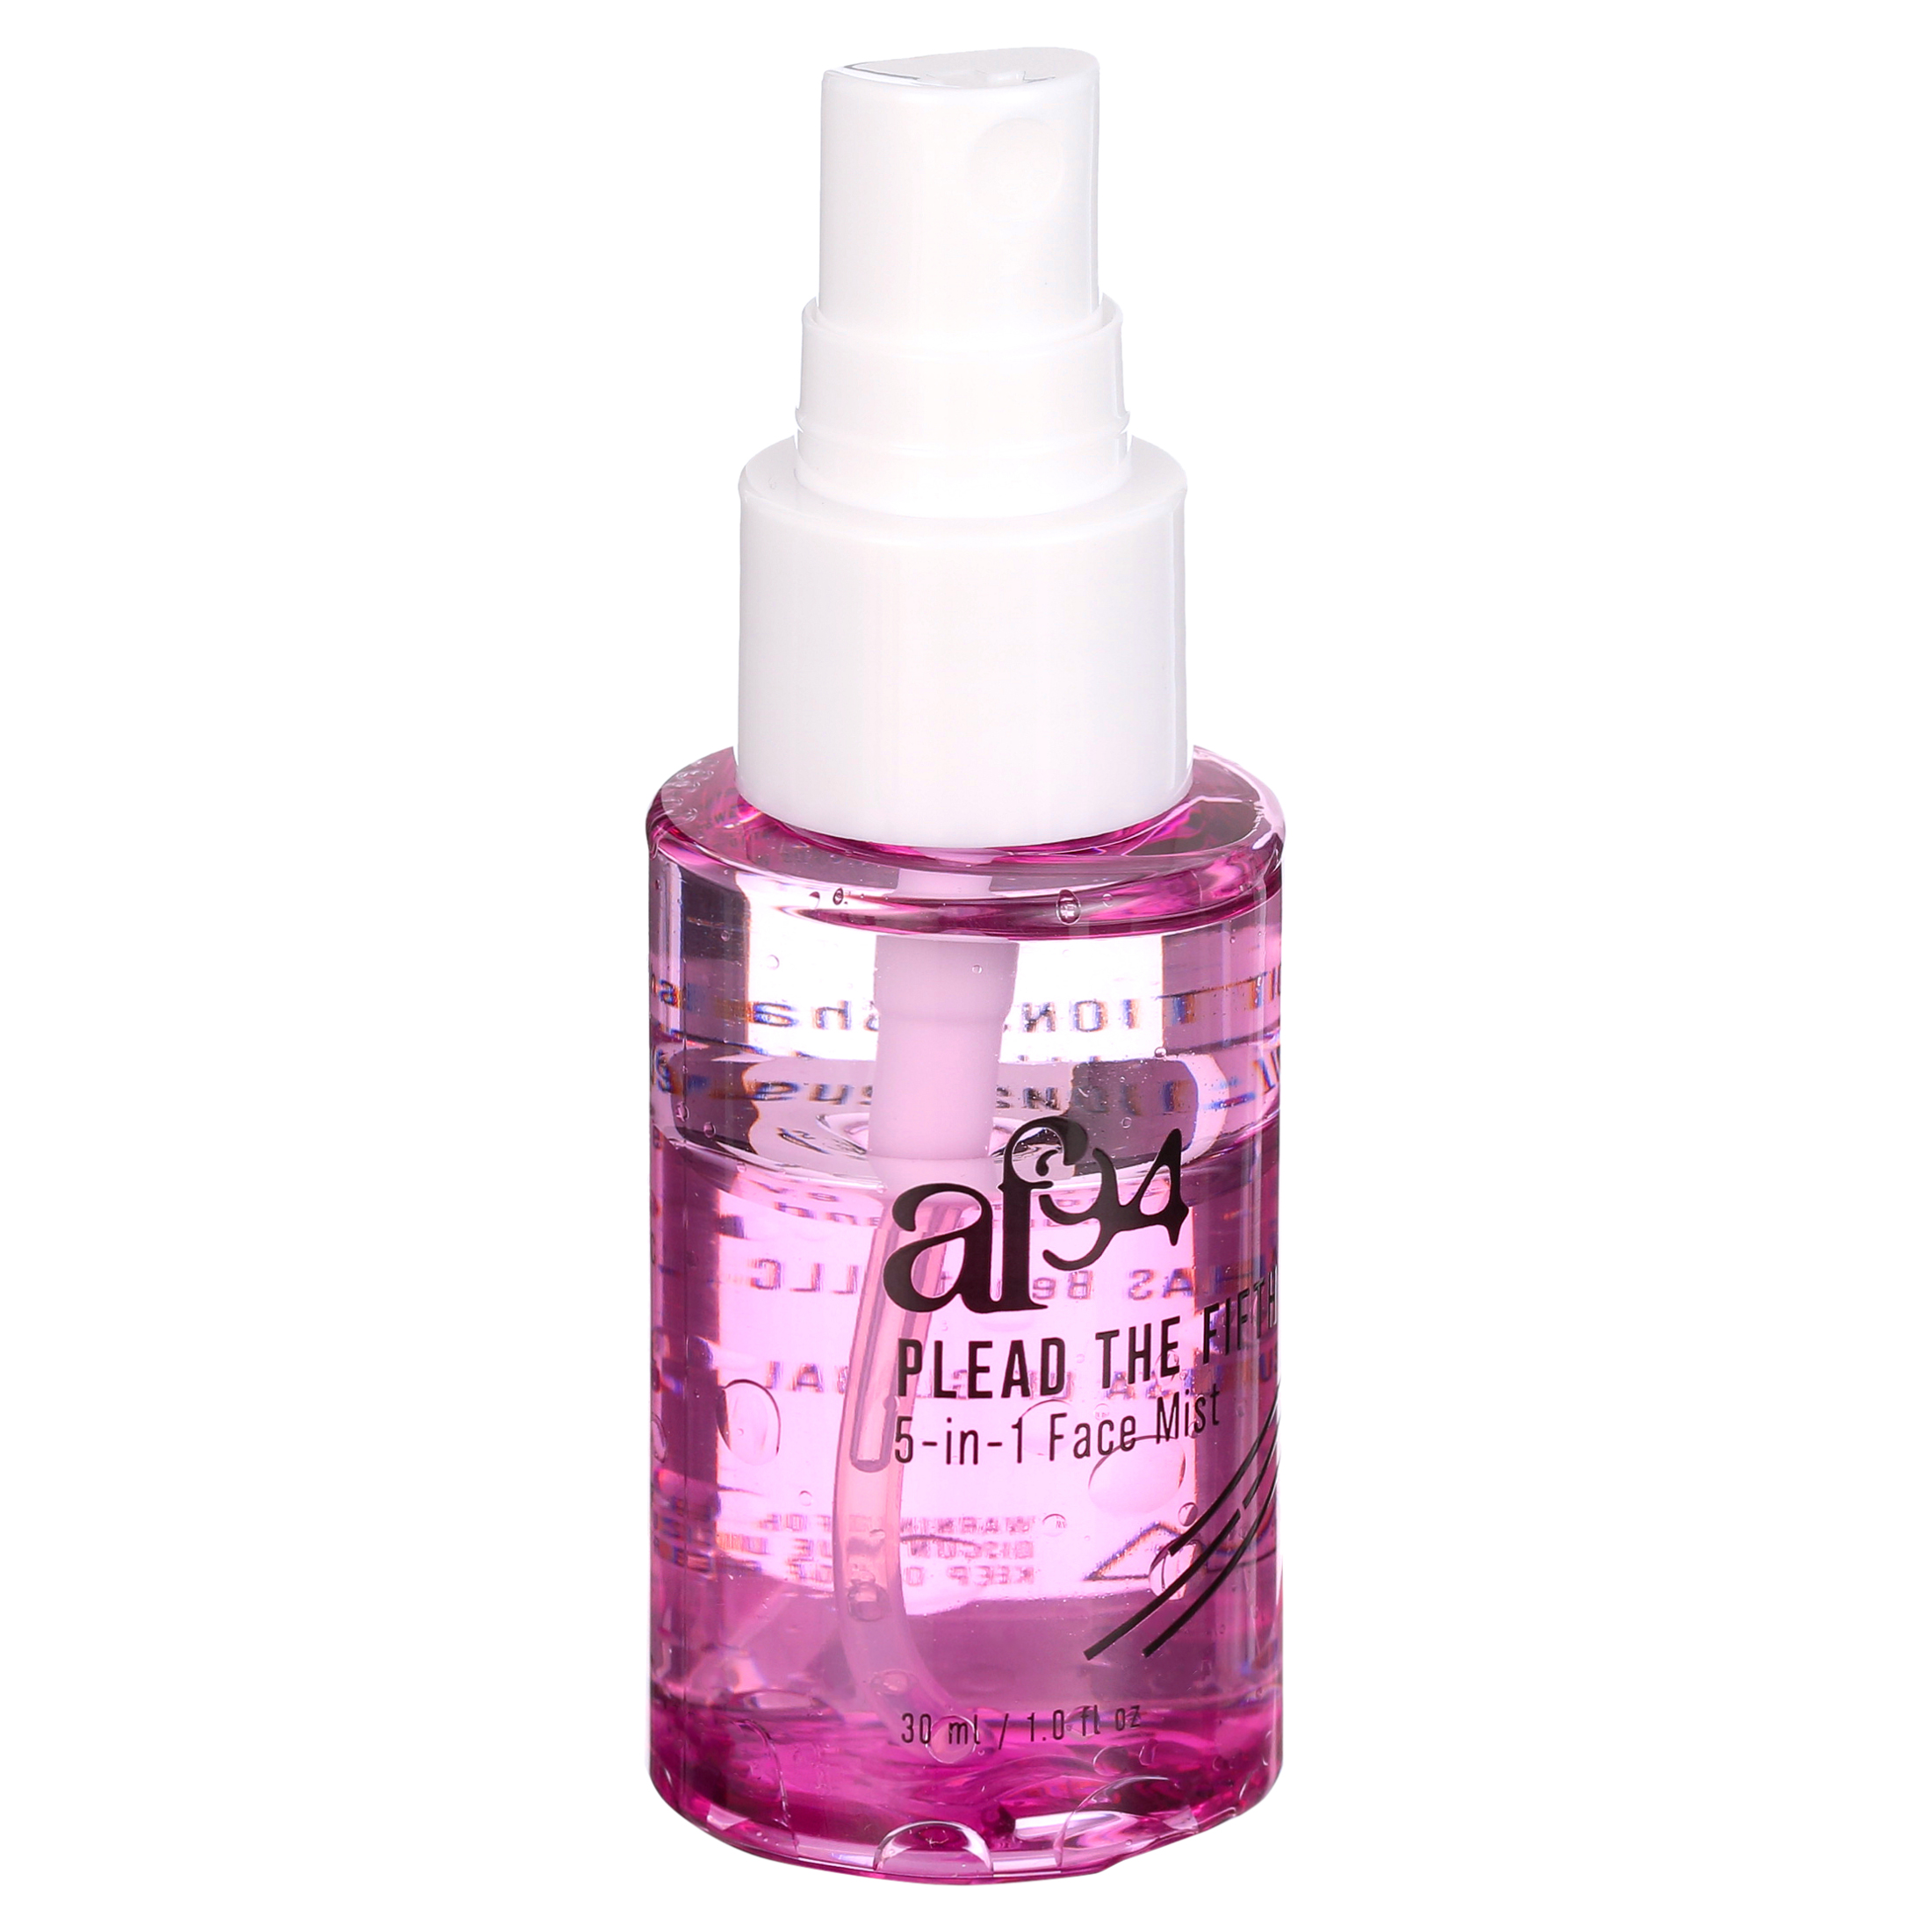 af94 Plead the Fifth 5-in-1 Face Mist, Hydrating & Illuminating, 1.0 fl oz - image 4 of 6